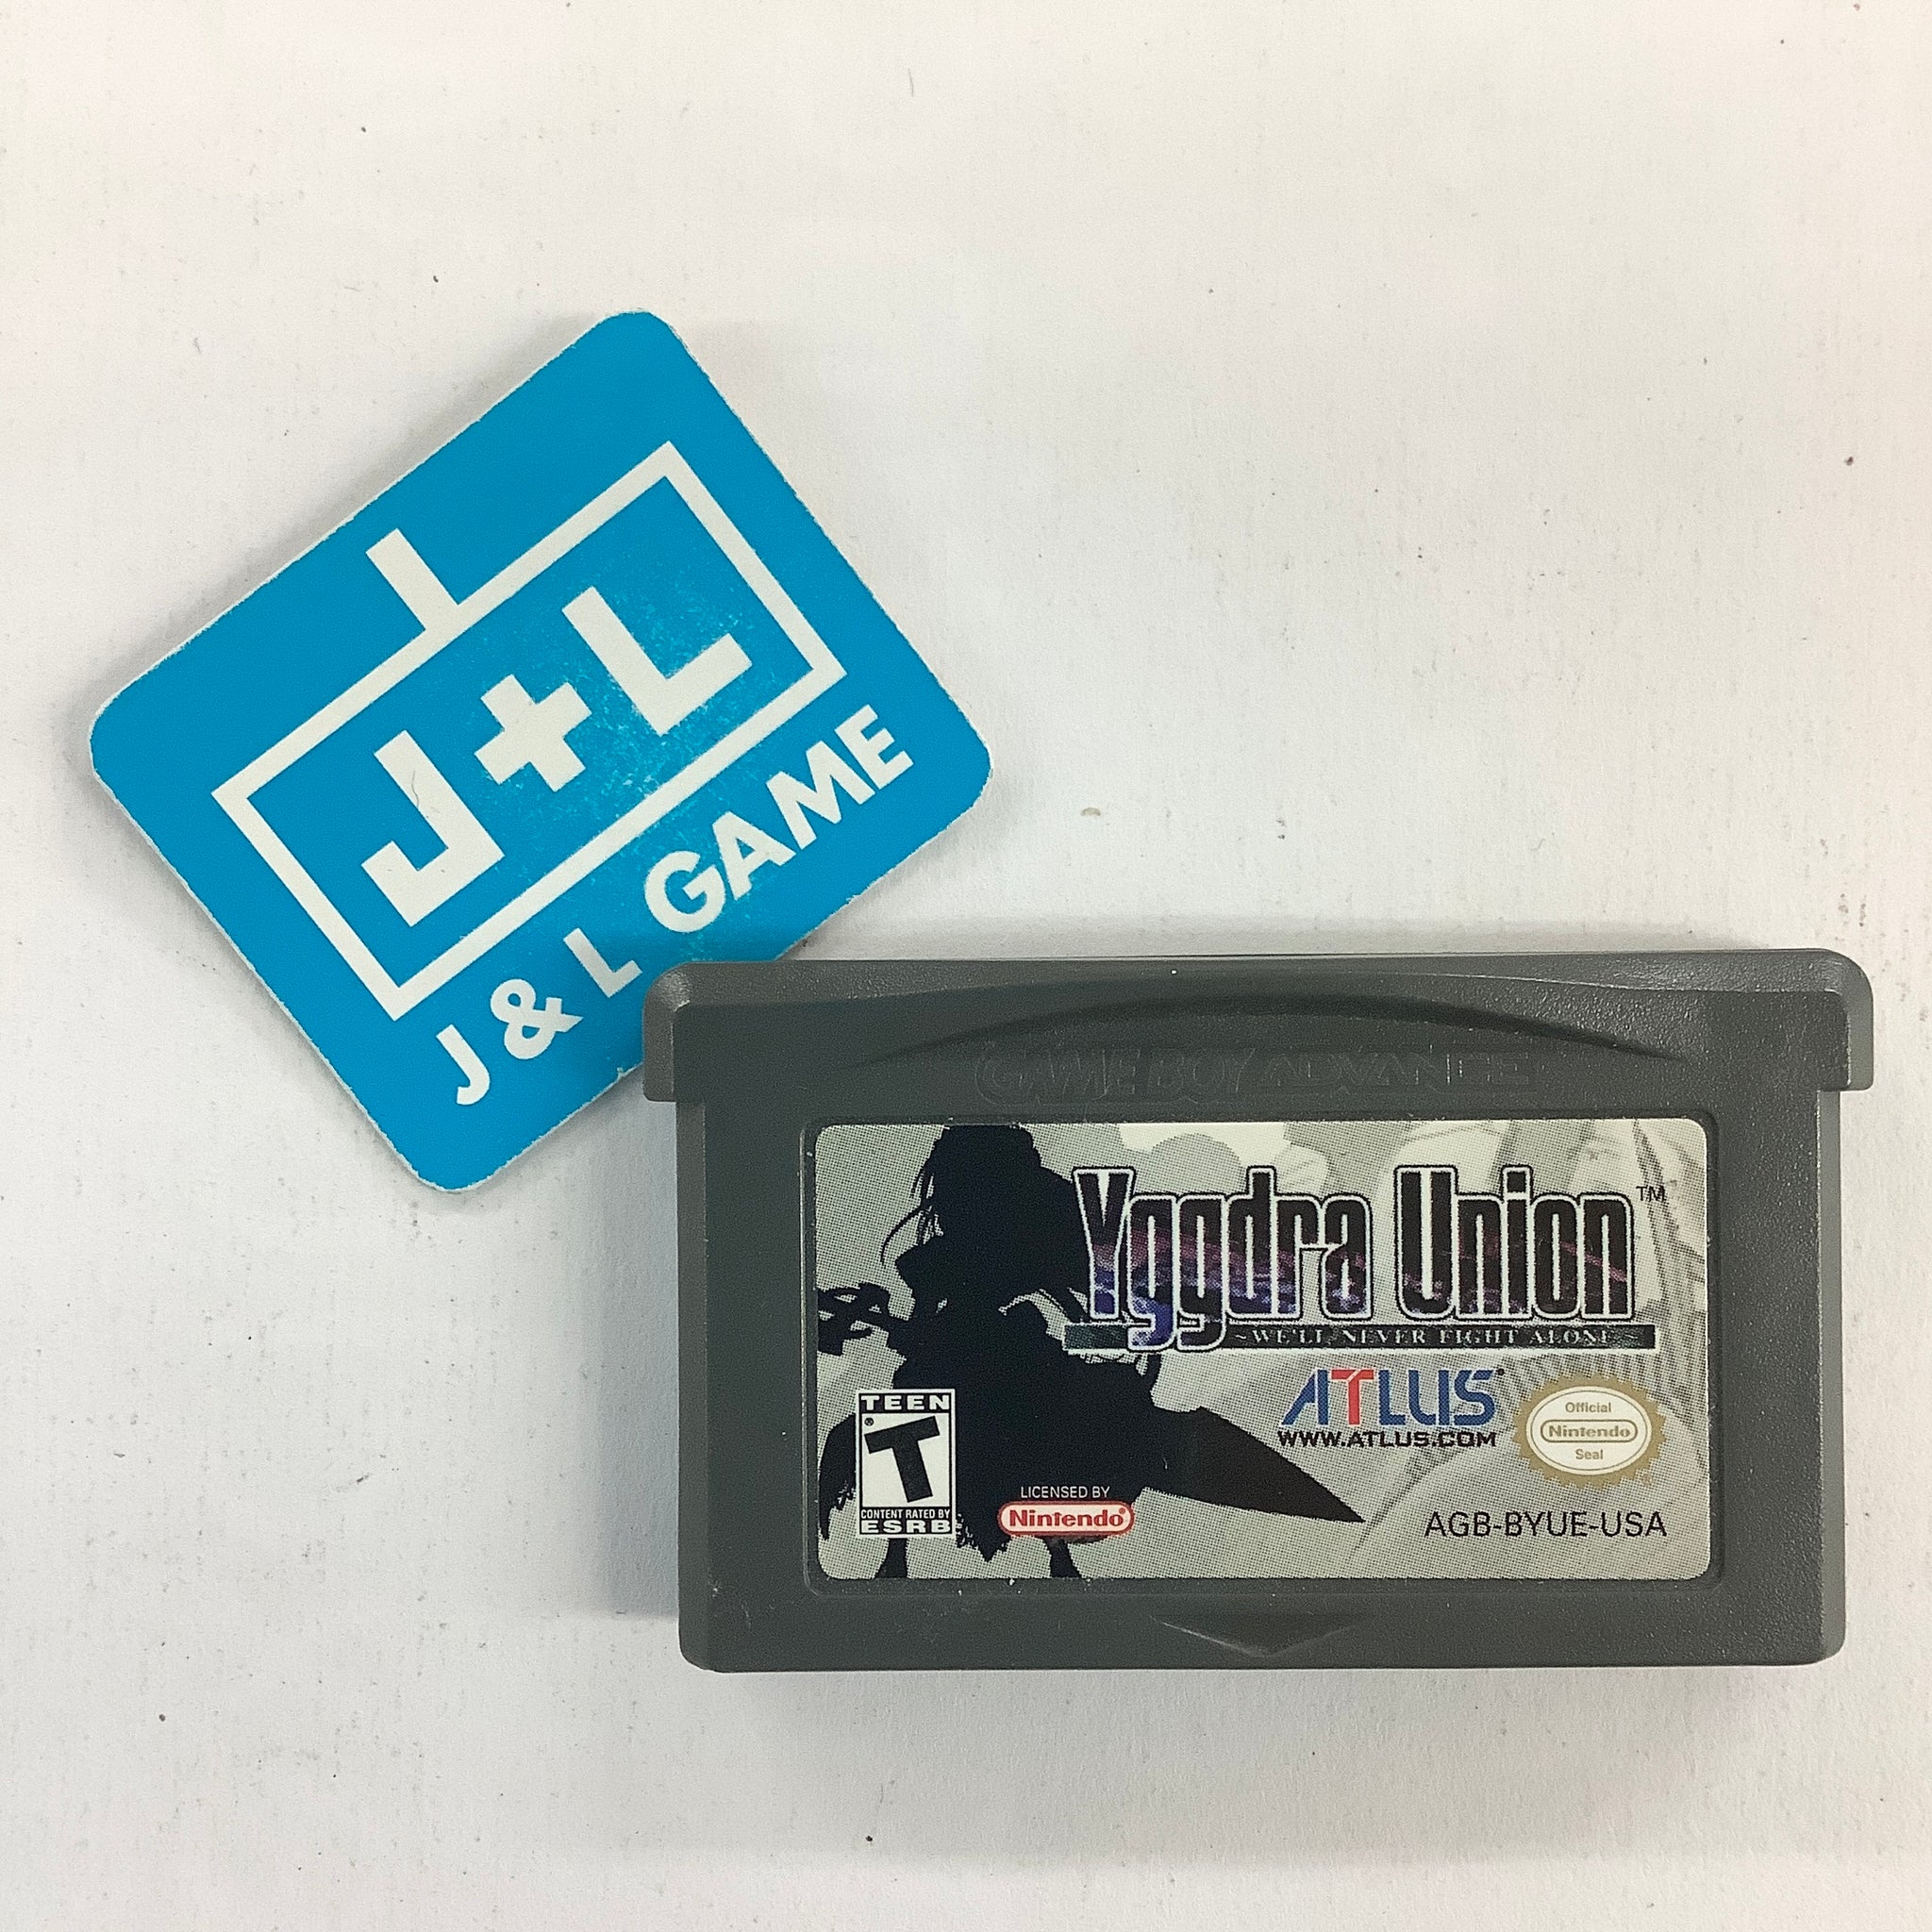 Yggdra Union: We'll Never Fight Alone - (GBA) Game Boy Advance [Pre-Owned] Video Games Atlus   